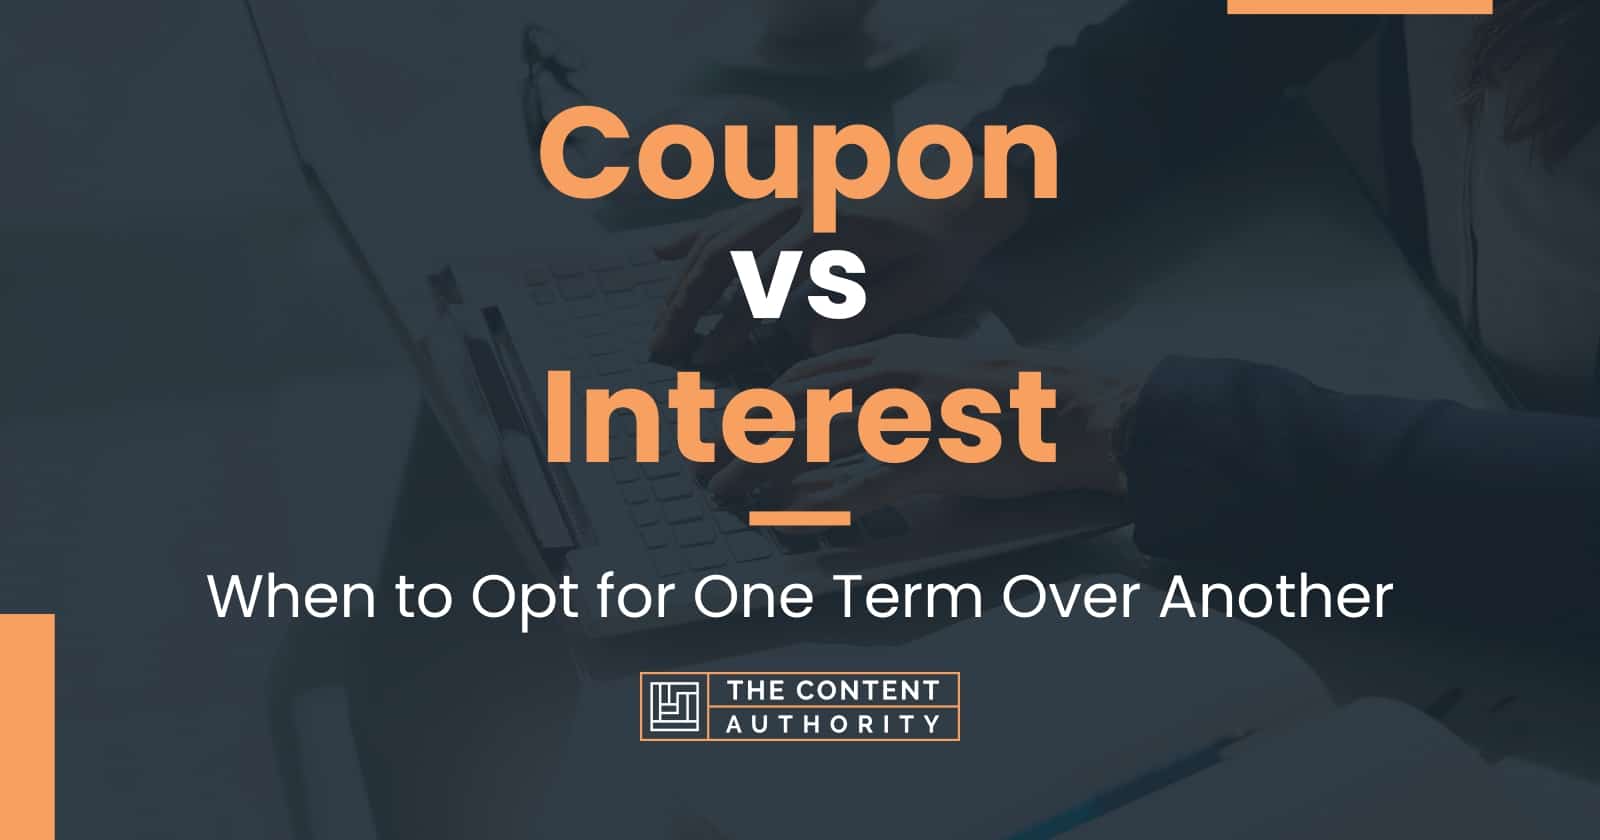 coupon-vs-interest-when-to-opt-for-one-term-over-another